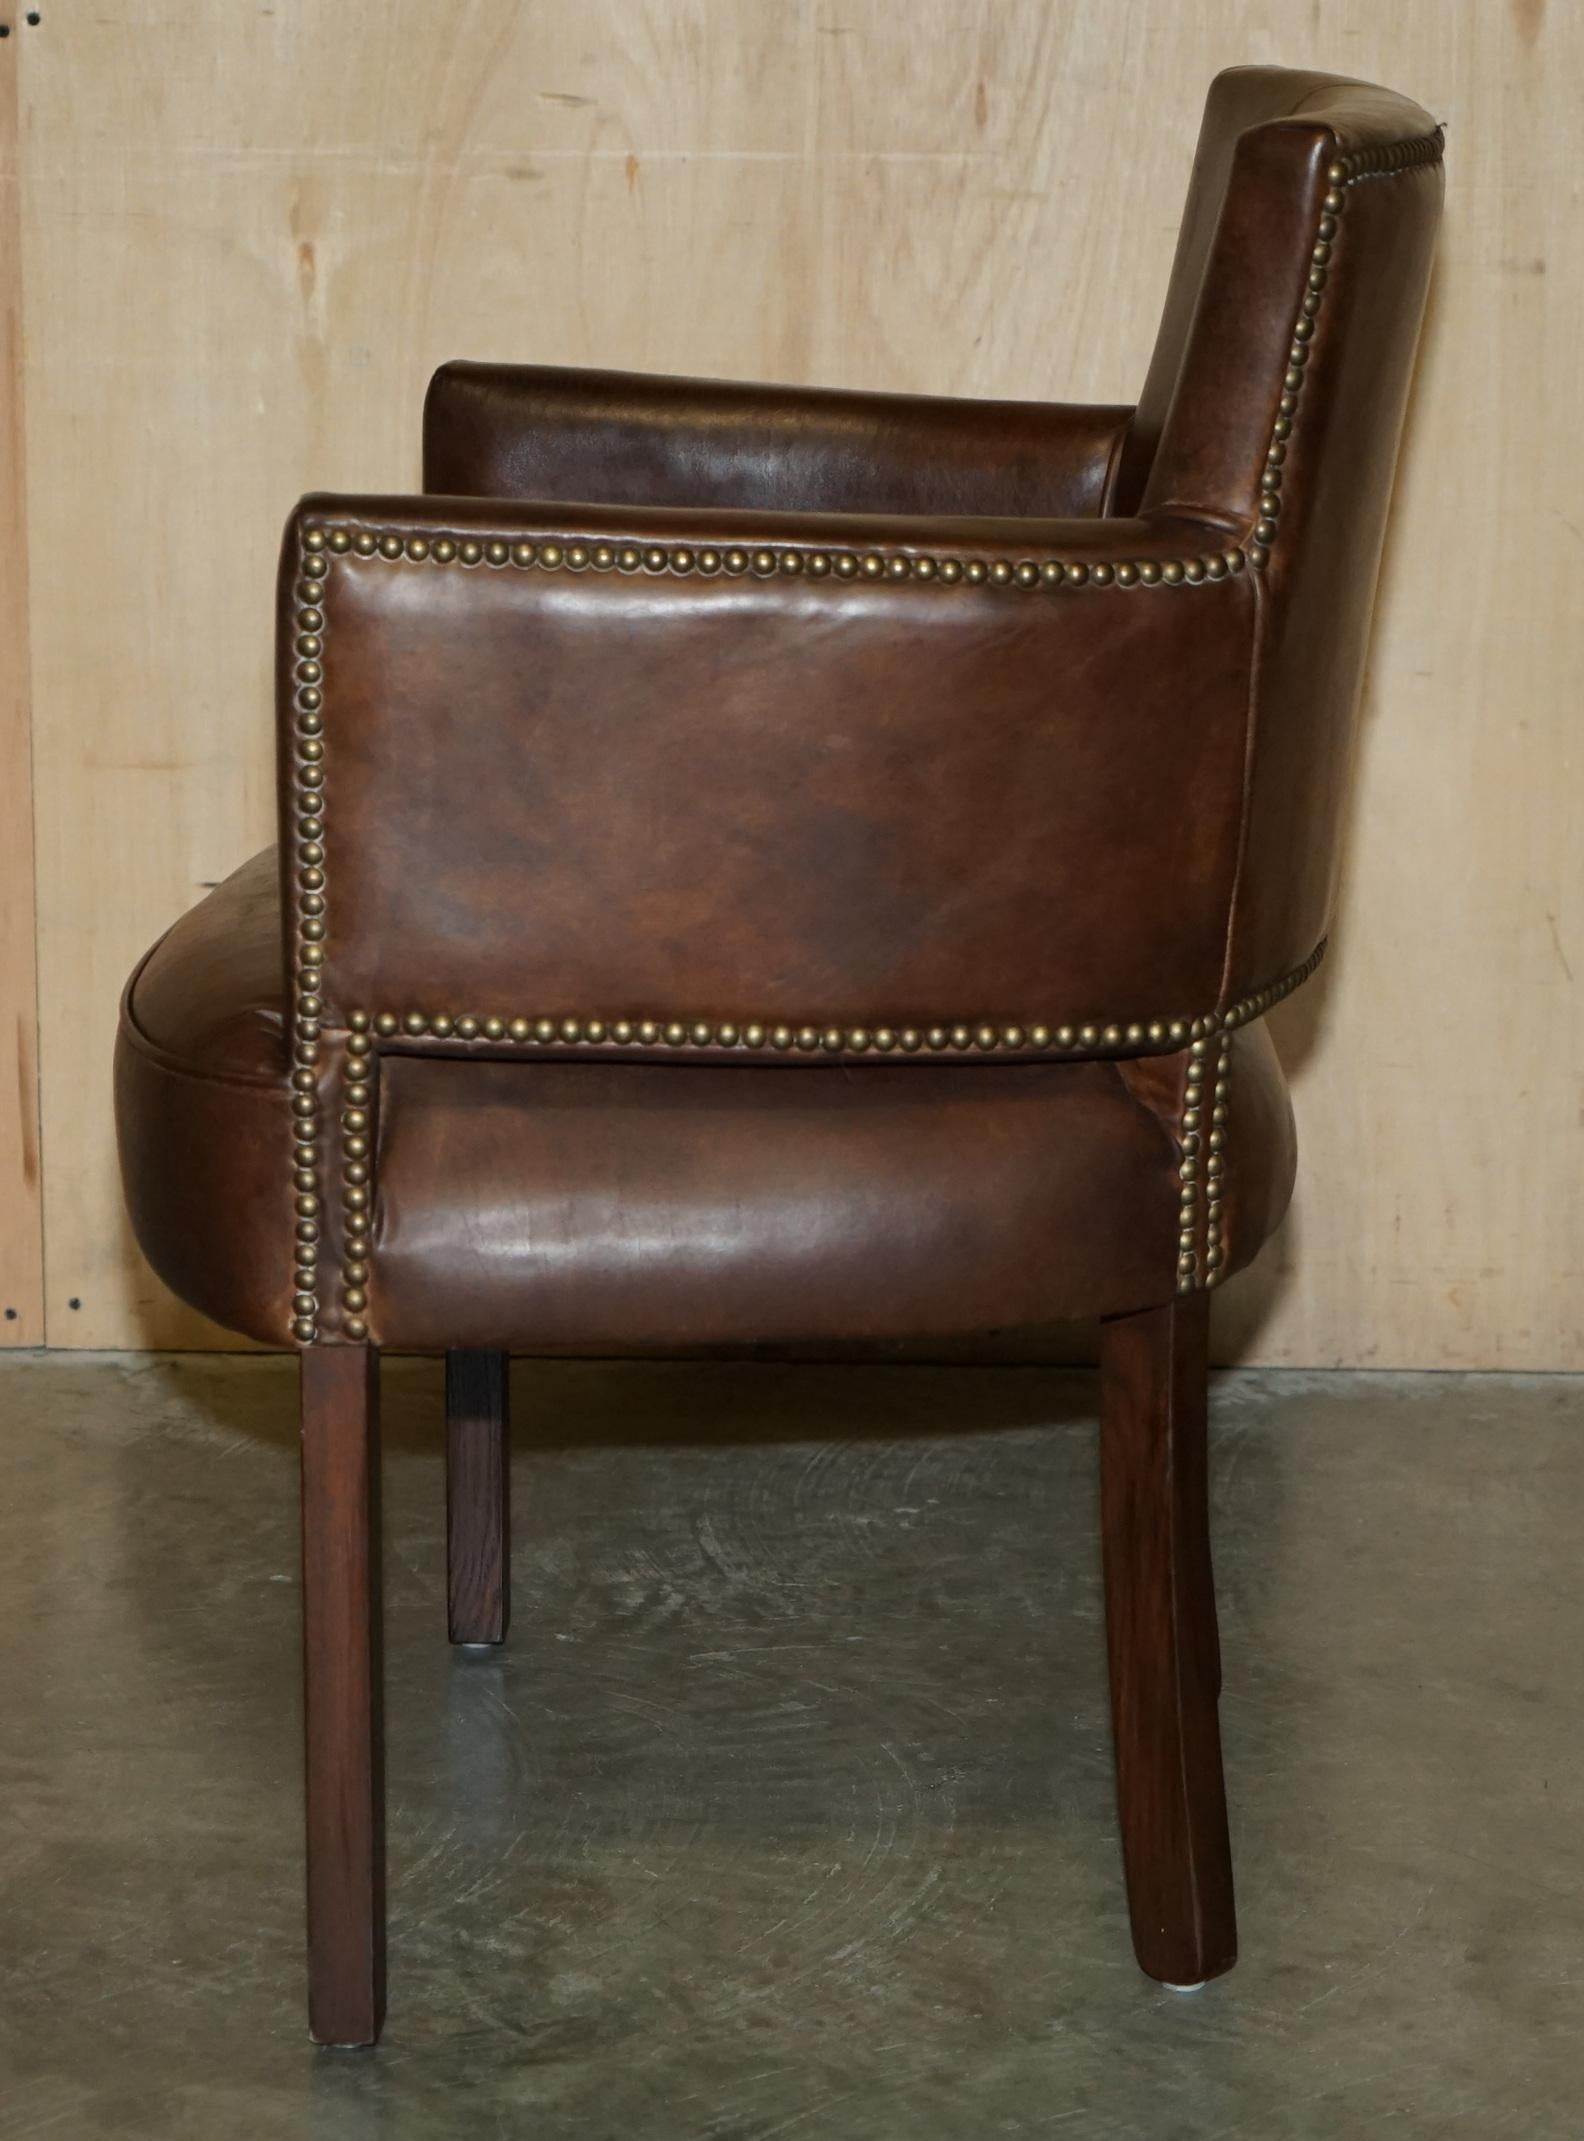 FINE PAIR OF ViNTAGE HALO HERITAGE BROWN LEATHER OCCASIONAL OR DINING CHAIRS 11